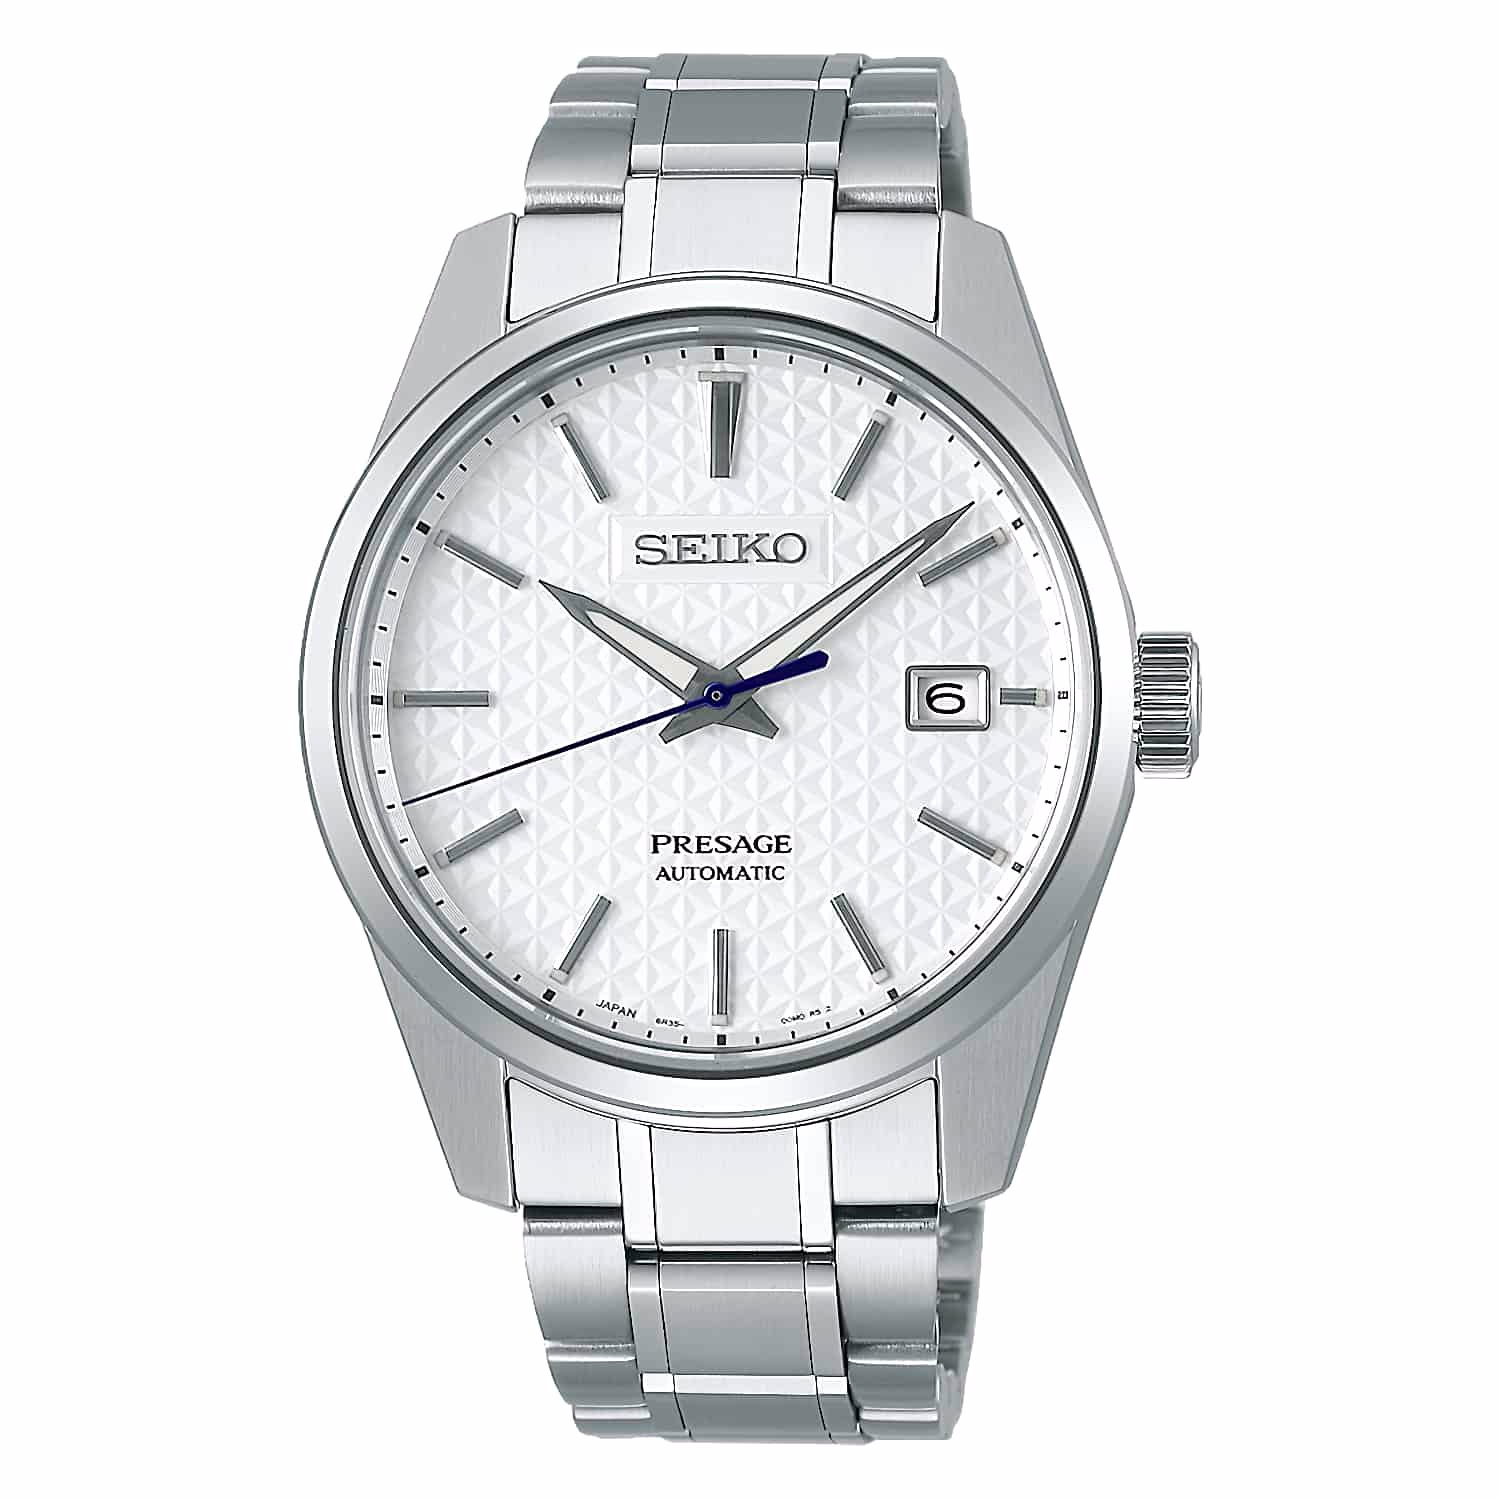 SPB165J1 SEIKO Presage Sharp Edged Series Watch. Since time immemorial, a central aspect of the Japanese sense of beauty has been simplicity.  To create objects or images of refinement and grace with few elements and no extraneous decoration has long been